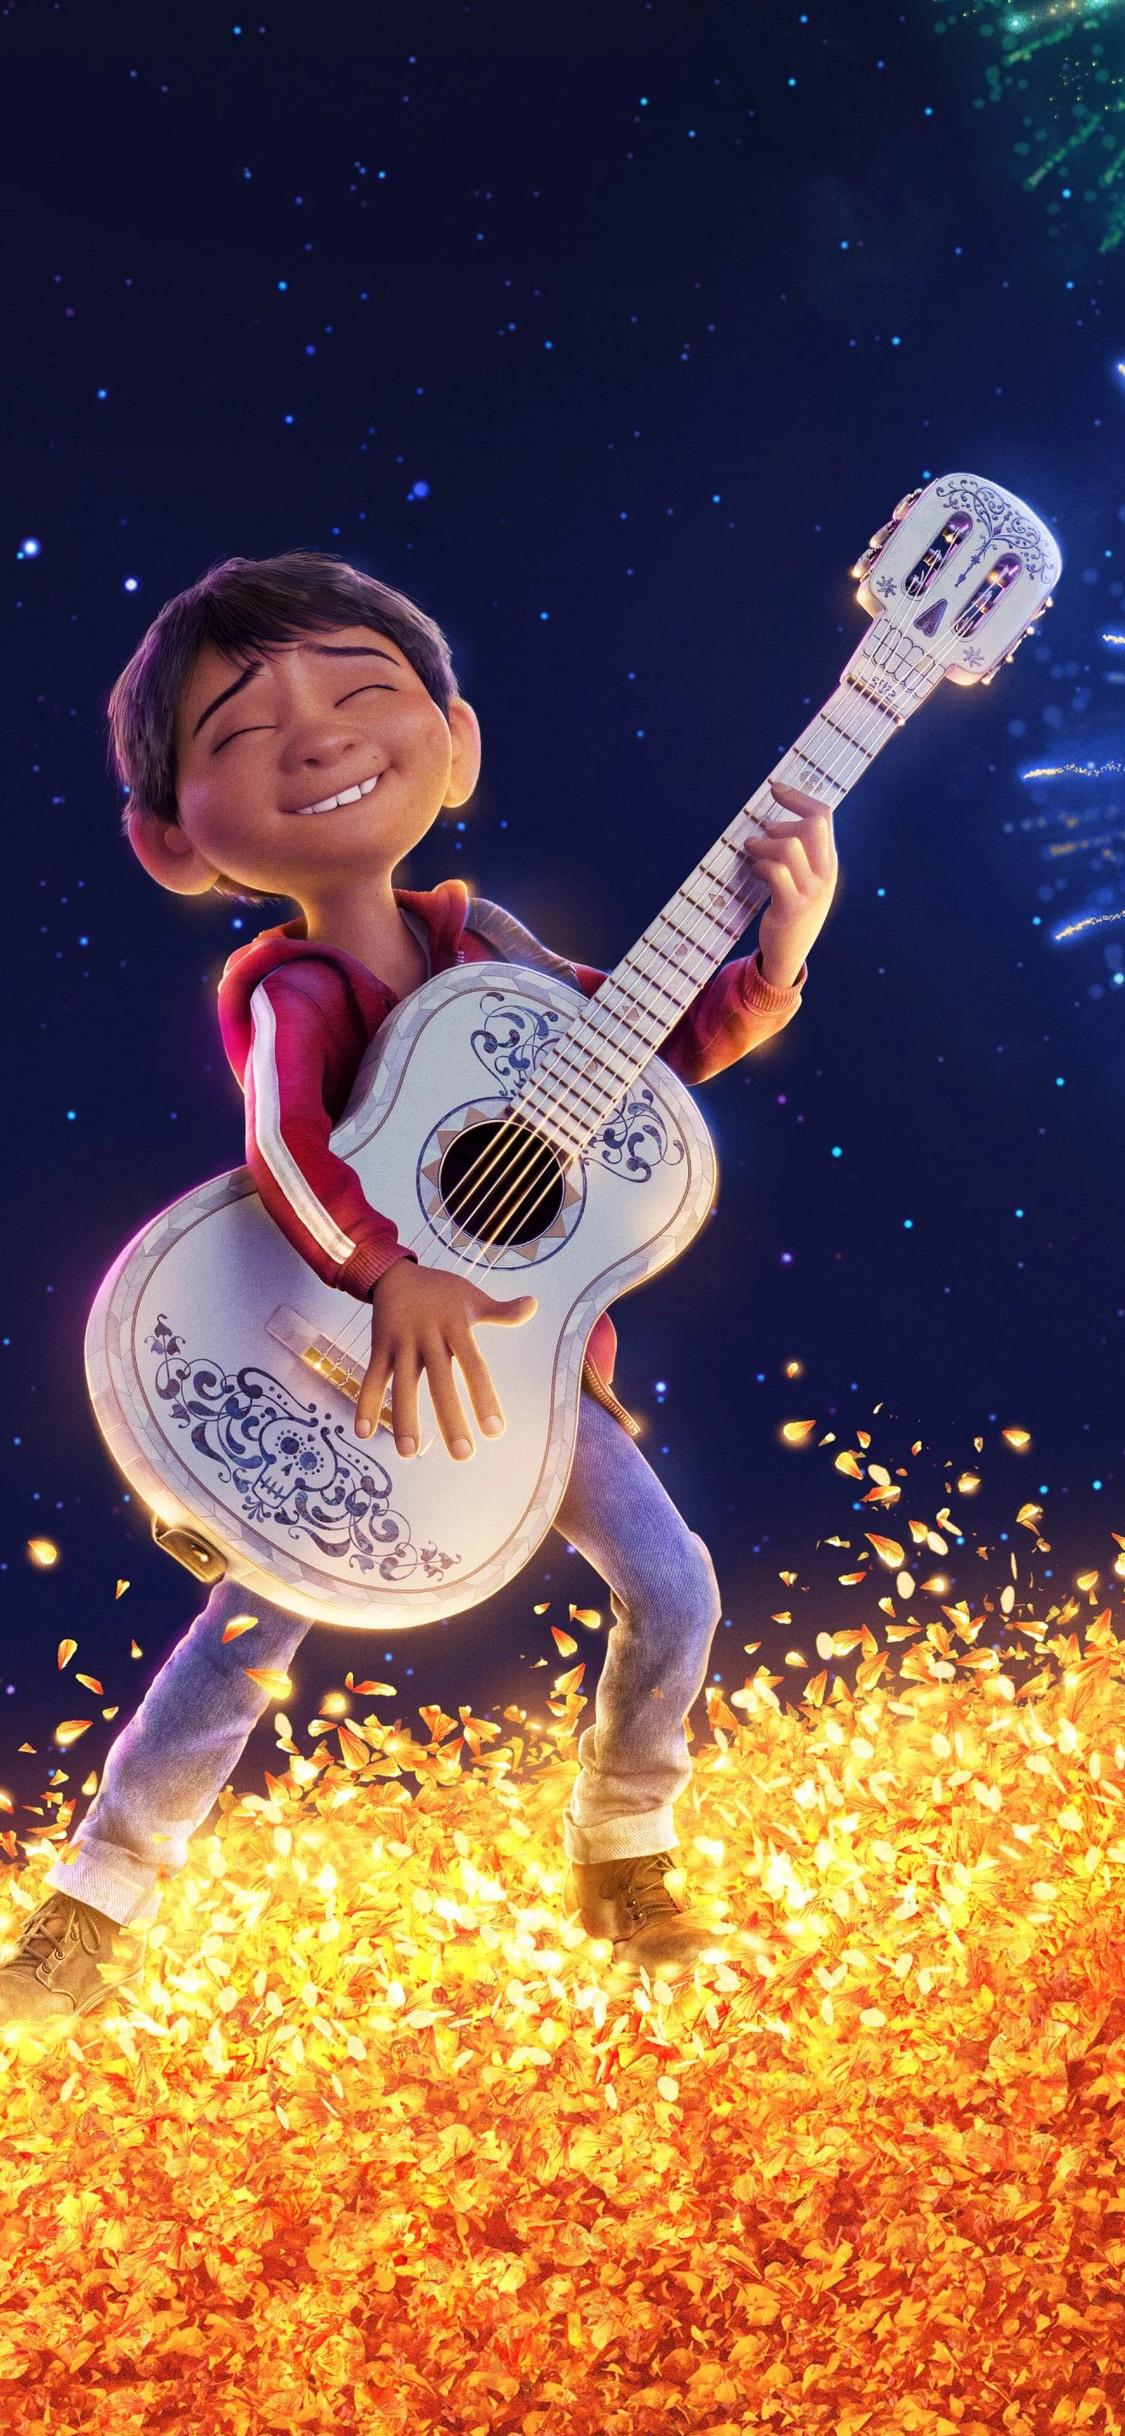 Coco boy iPhone X Wallpaper Free Download